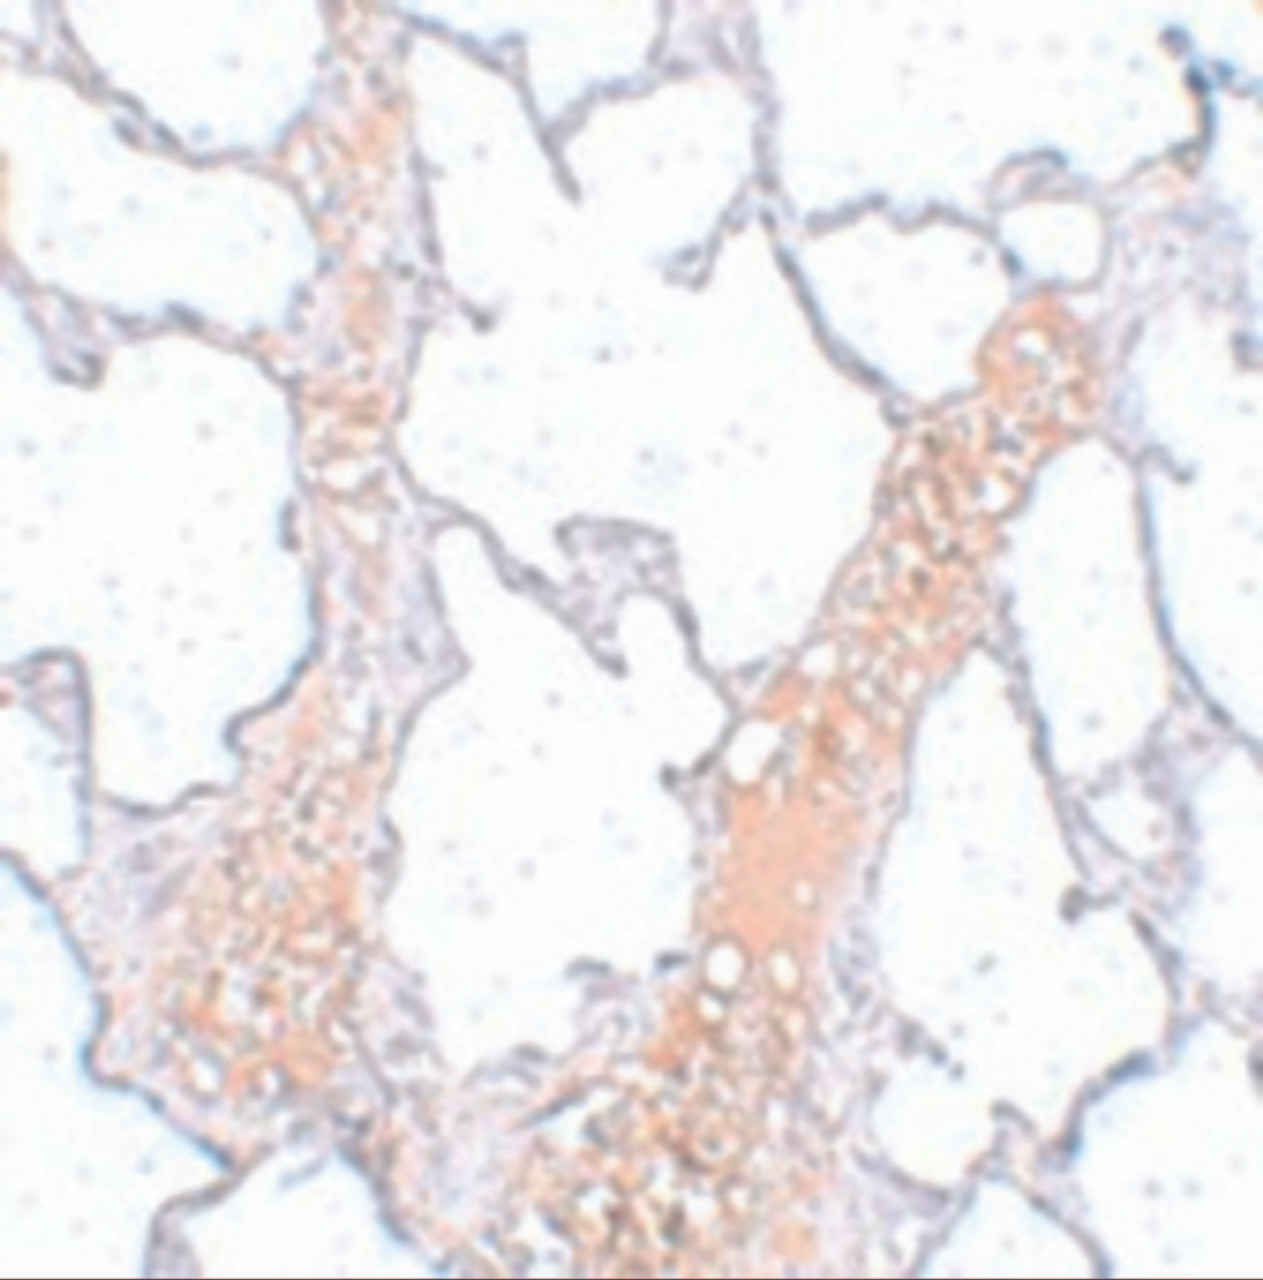 Immunohistochemistry of REEP2 in rat lung tissue with REEP2 antibody at 5 ug/mL.